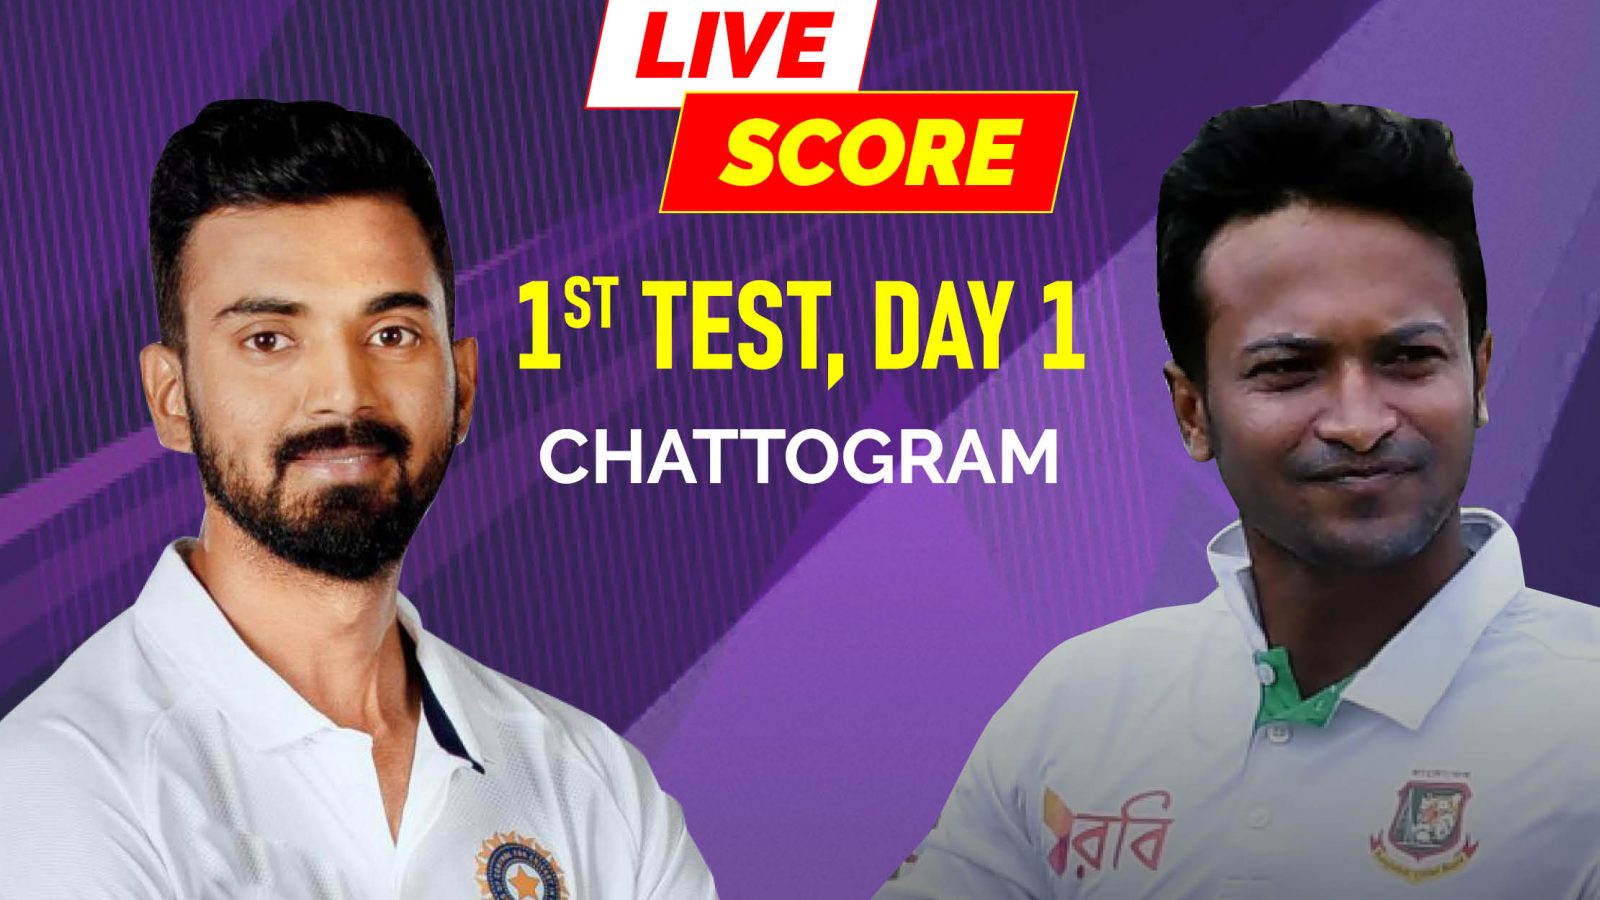 India vs Bangladesh, Highlights 1st Test, Day 1 Updates IND Post 278/6